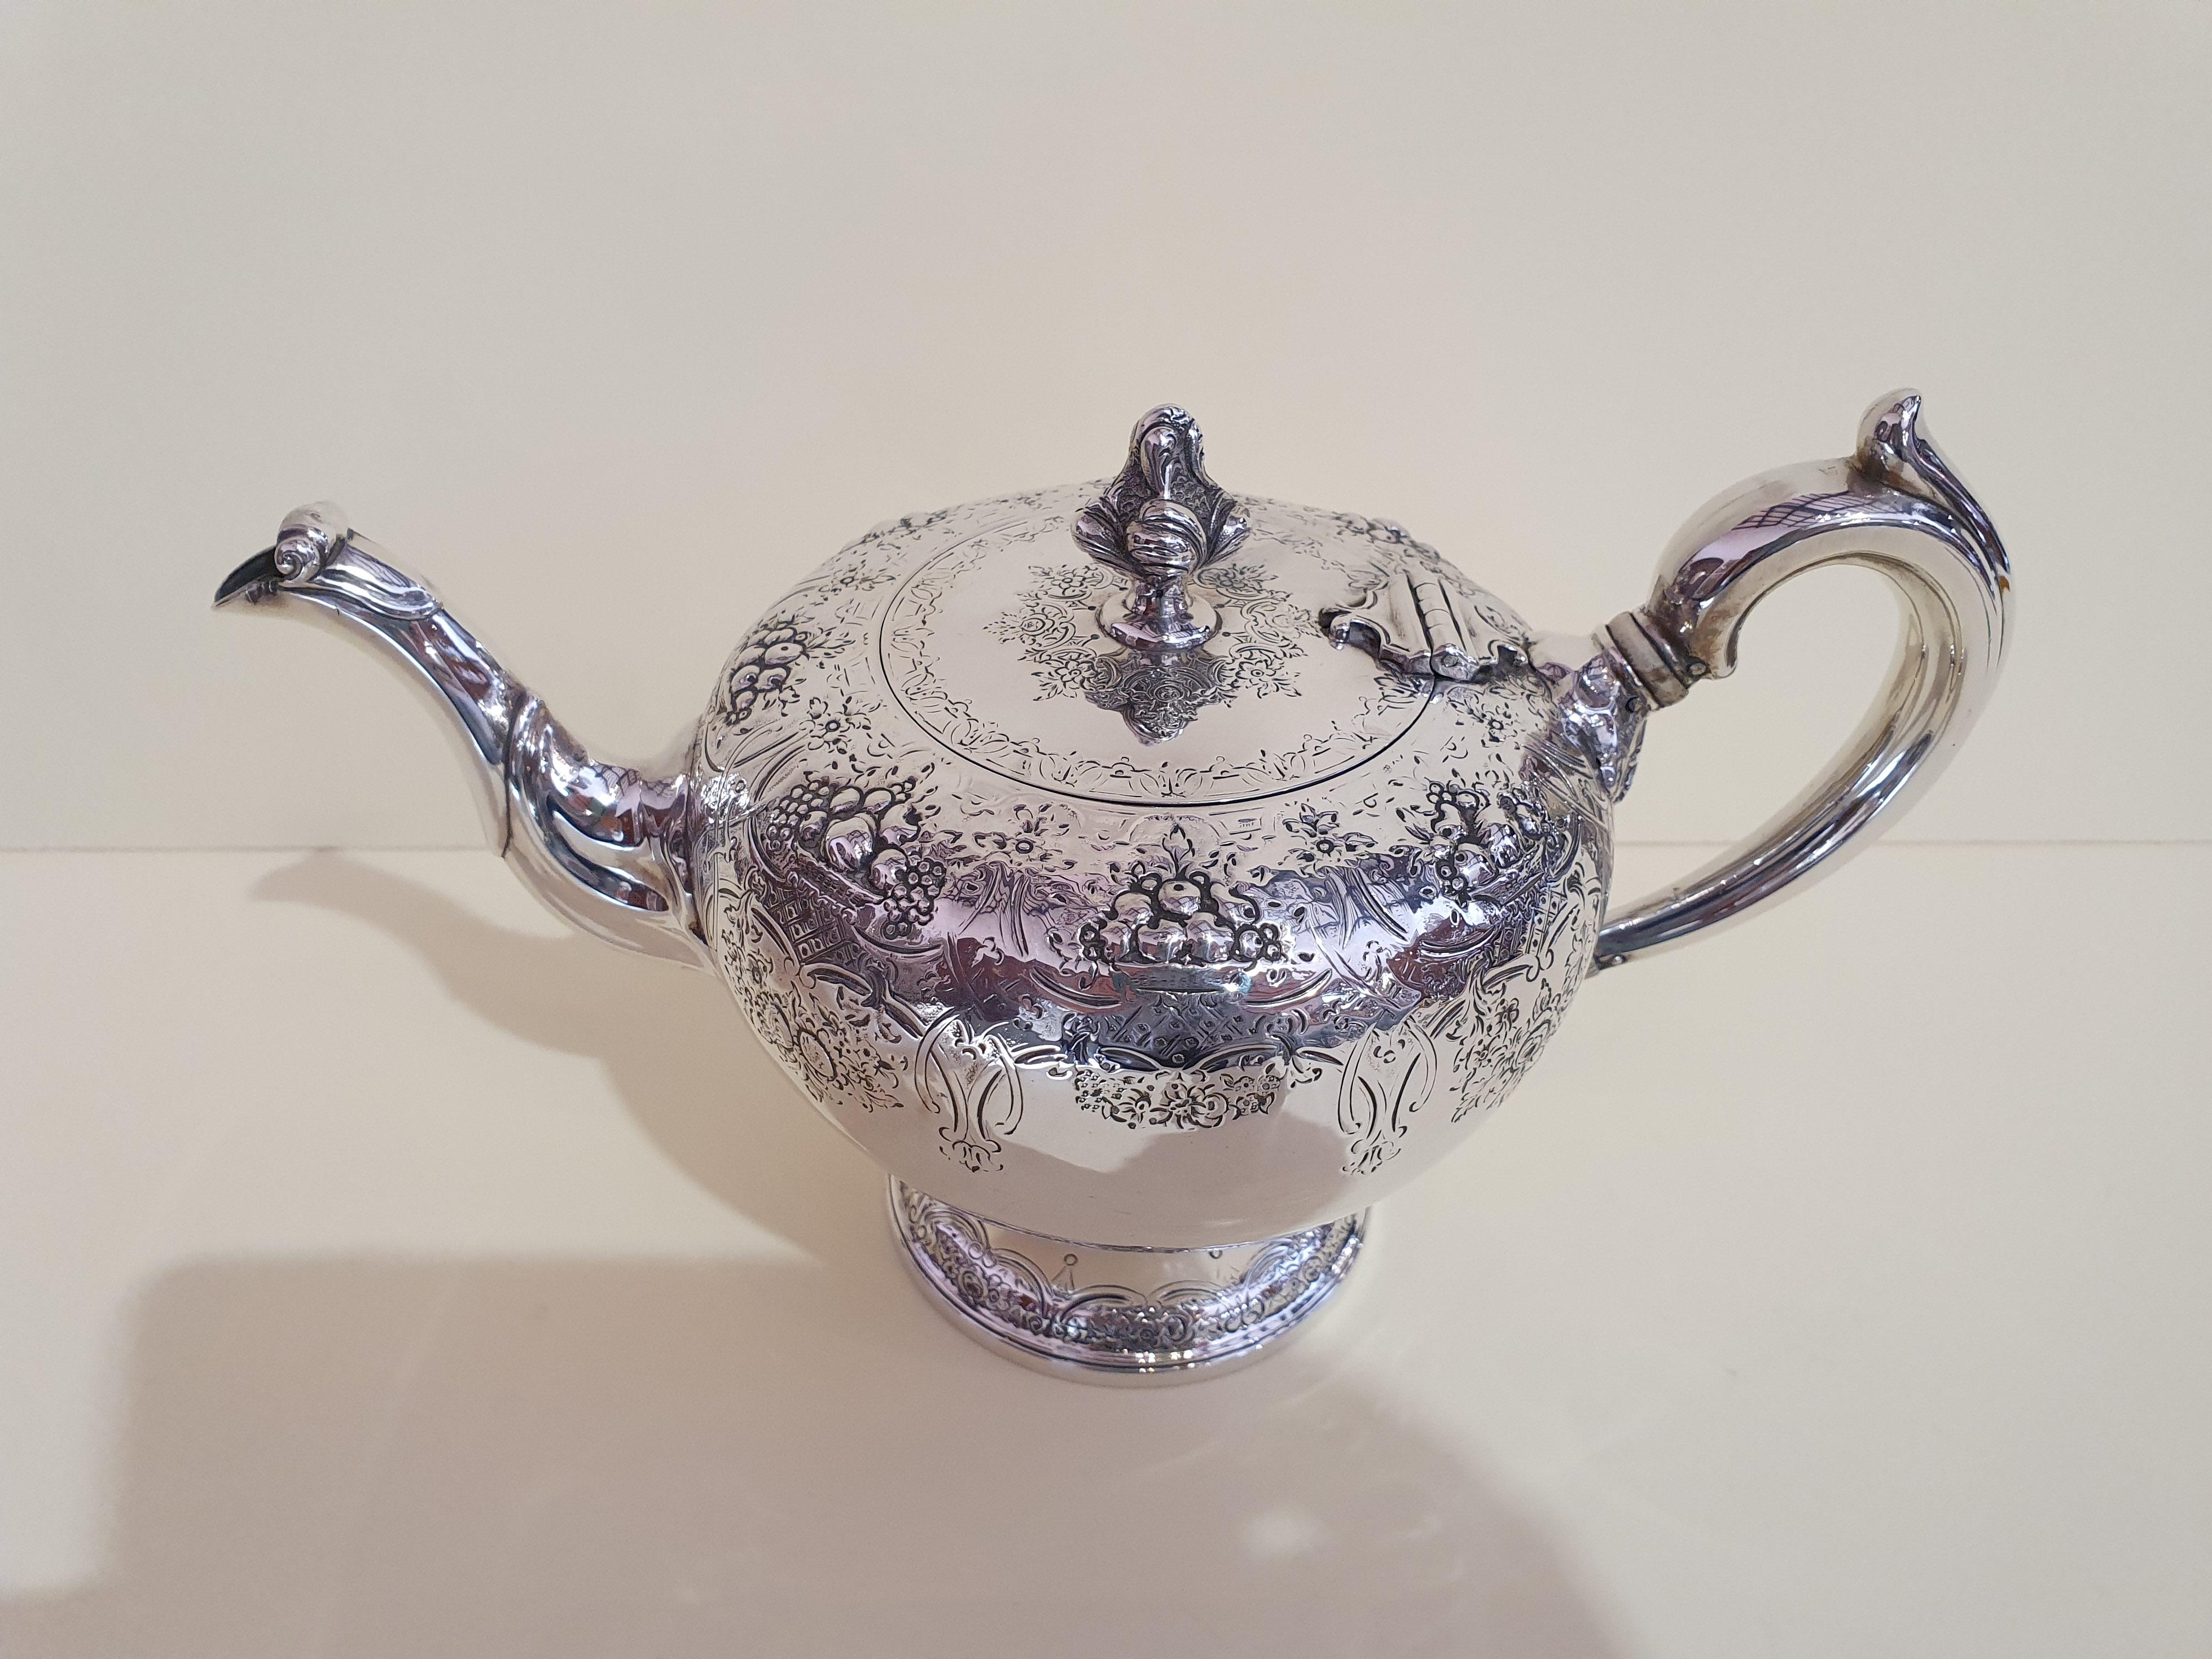 A fine and impressive antique Victorian Scottish sterling silver teapot.
The upper part of the teapot and the cover are embellished with a decoration made with engraving of flowers and embossed fruit baskets.
The engraving is also repeated in the